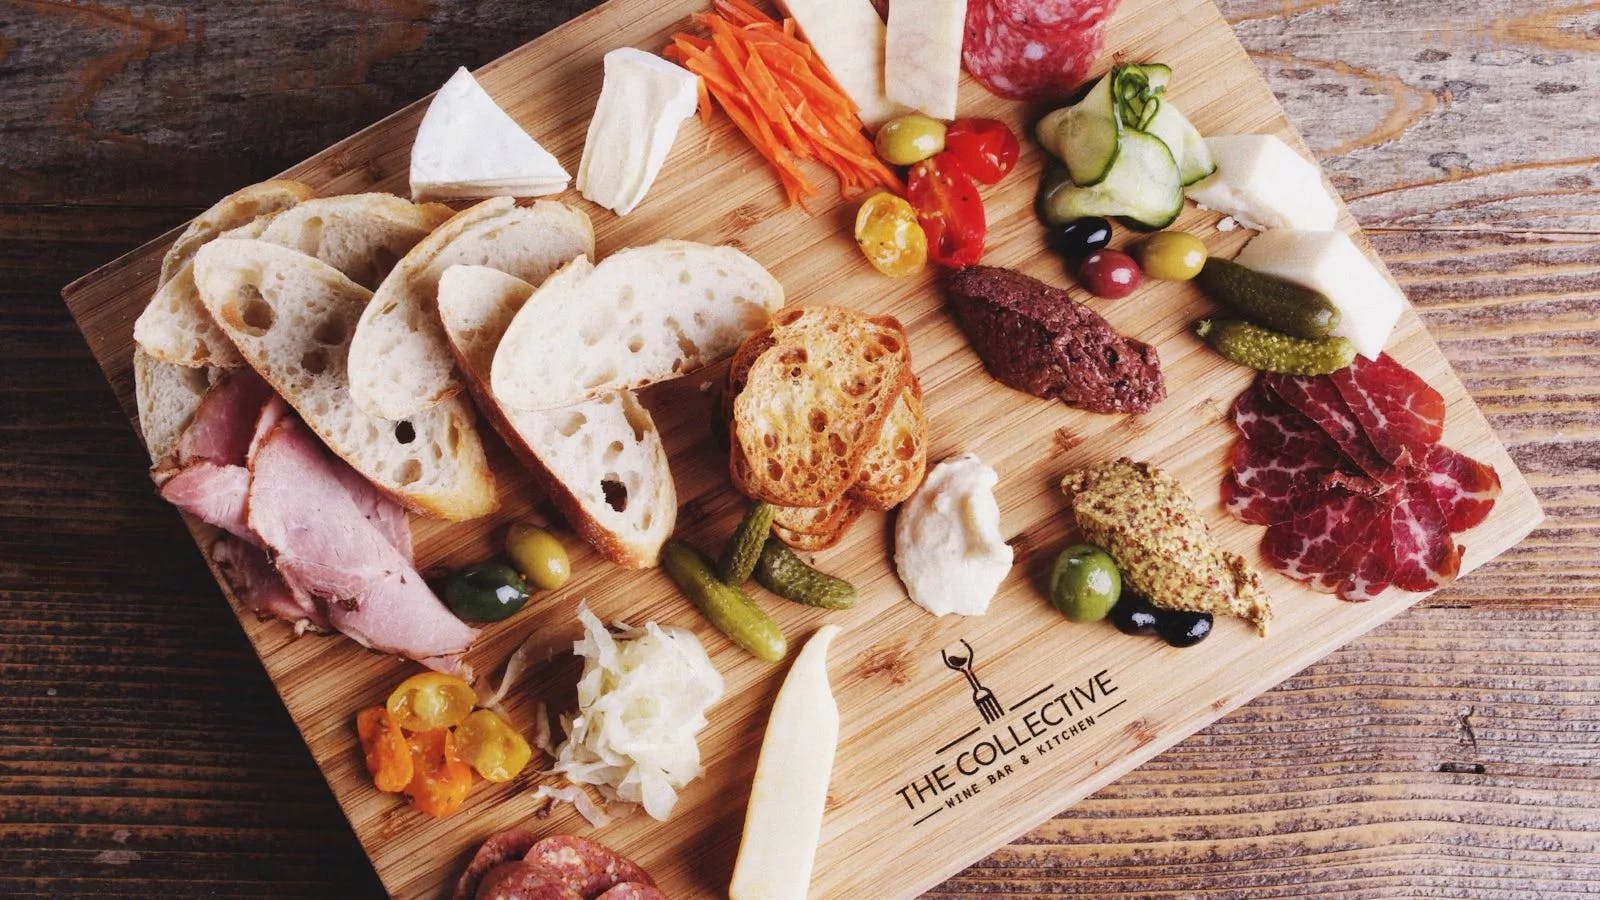 The Collective's signature cheese & charcuterie board